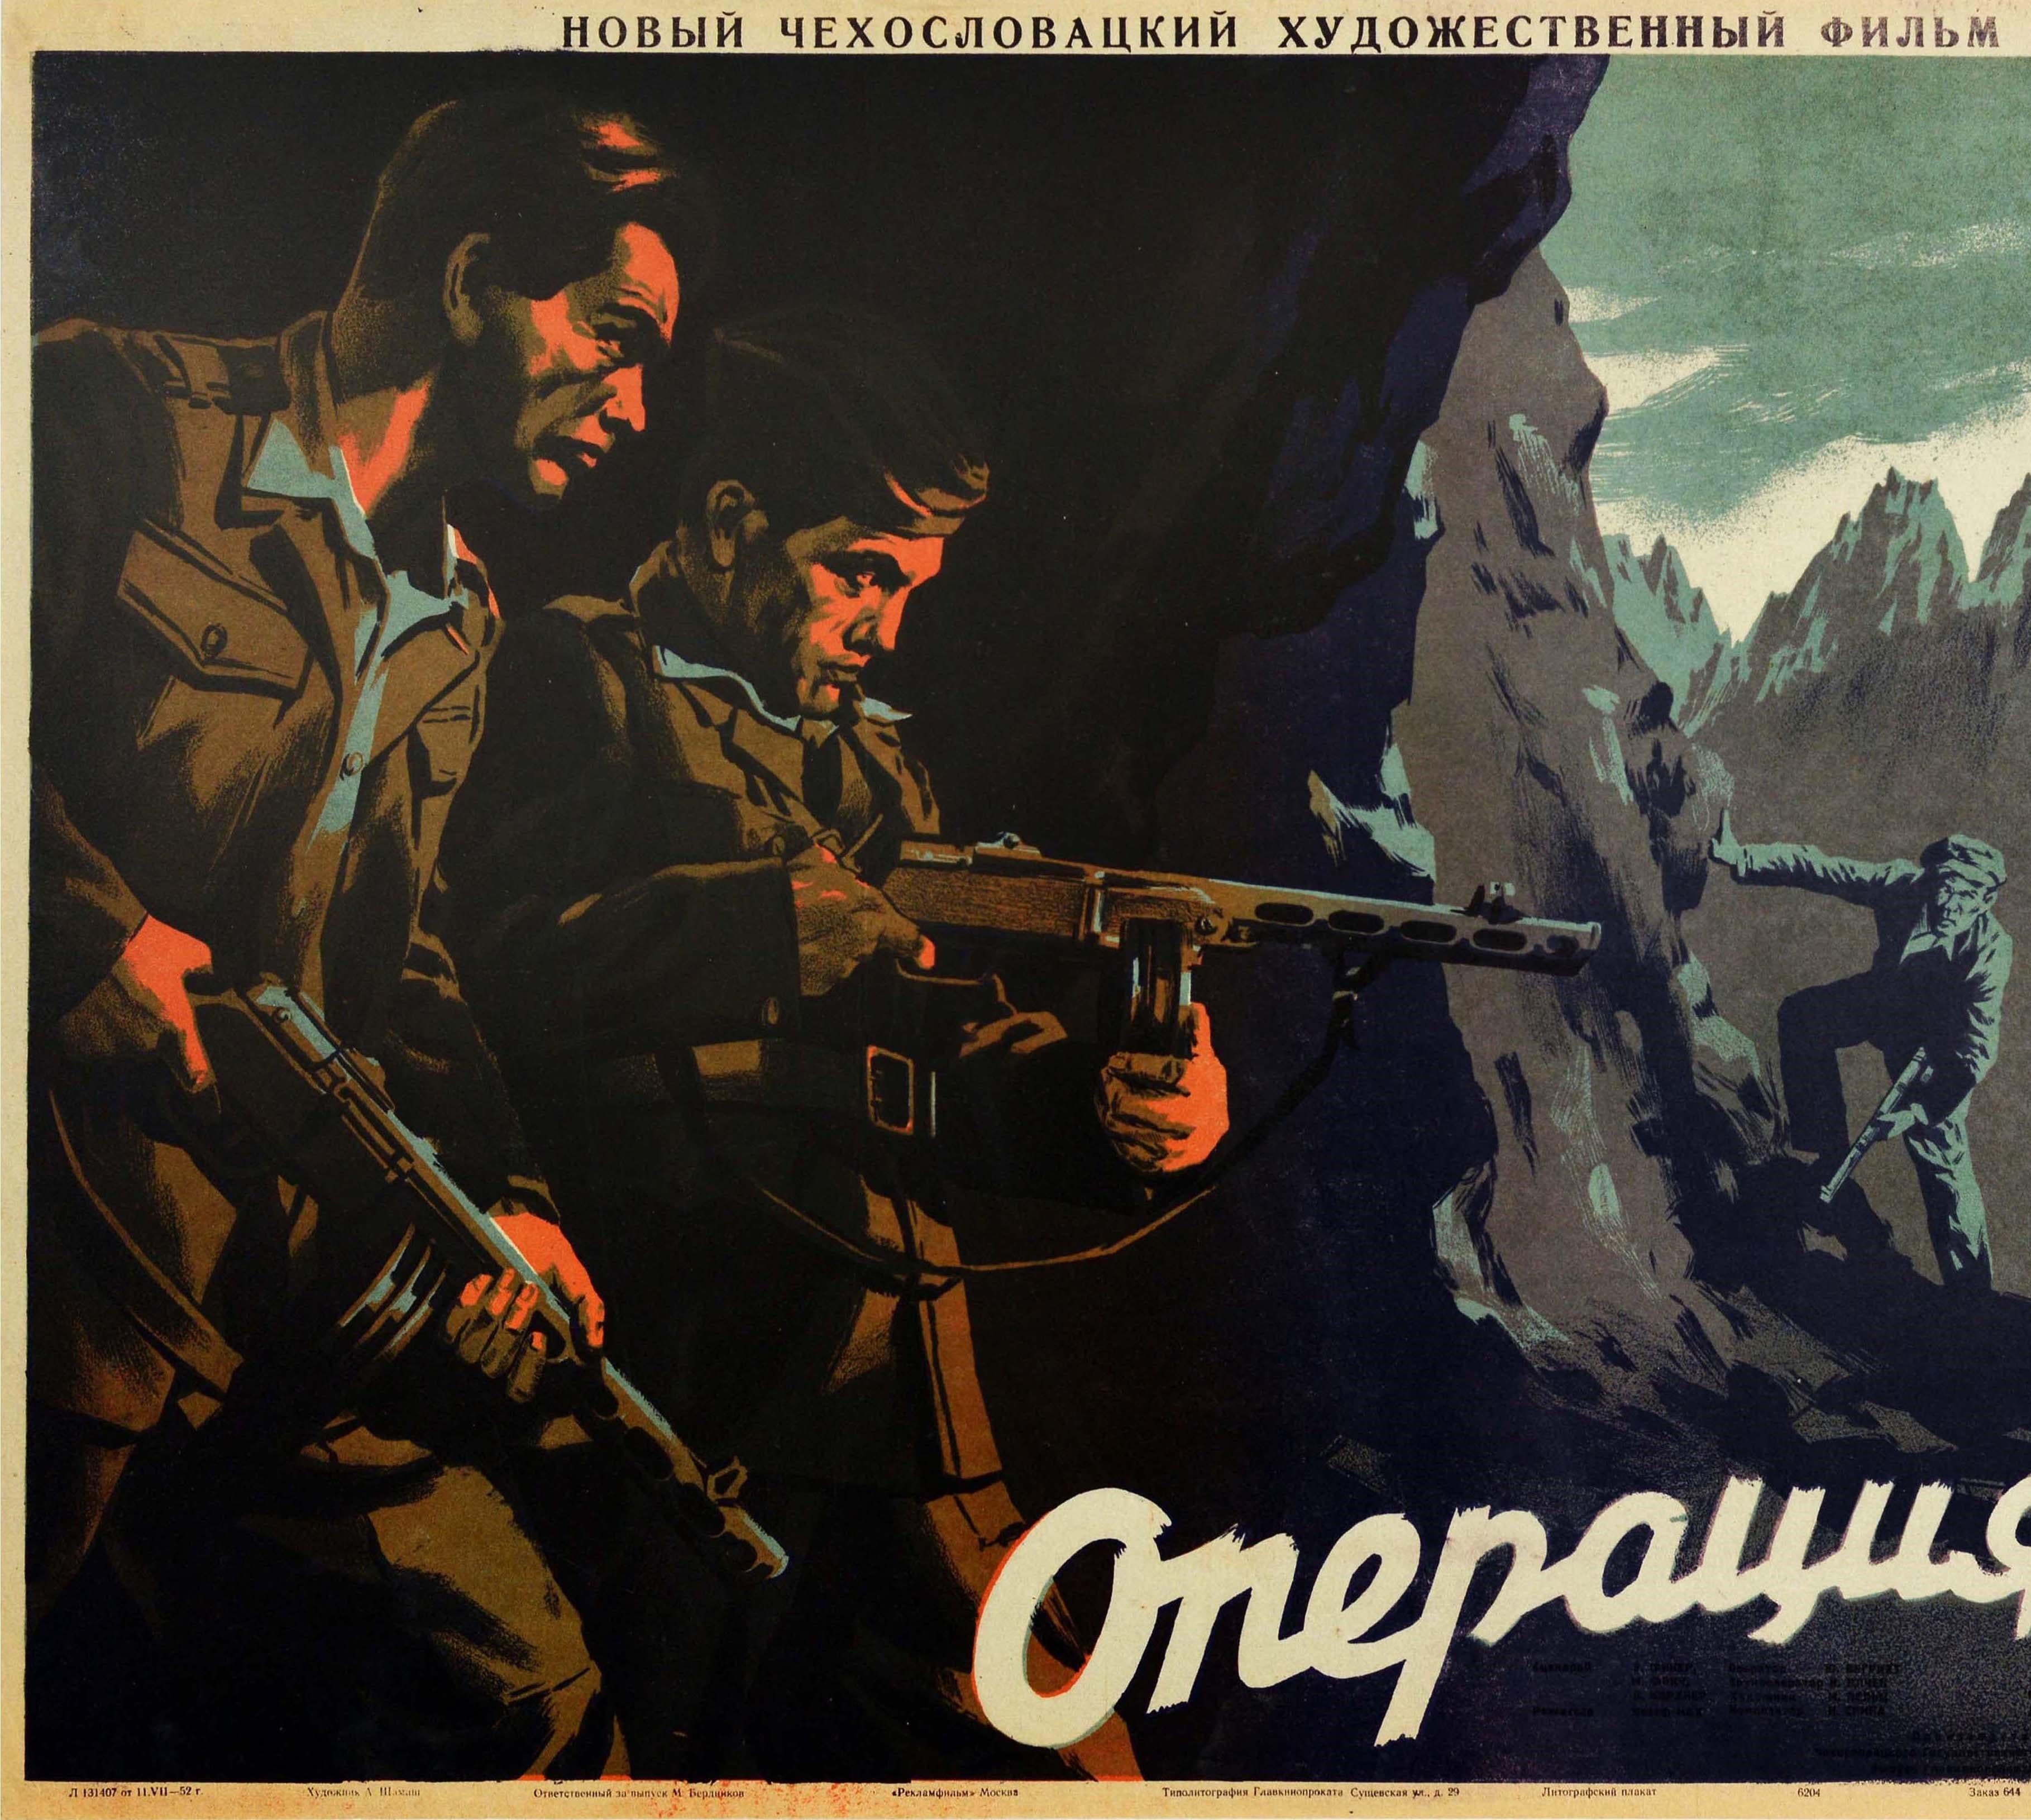 Original vintage cinema poster for the Russian release of a Czechoslovak action drama adventure film Akce B / Action B / ???????? ? featuring a scene showing three men cautiously approaching two soldiers wearing military uniform and armed with guns